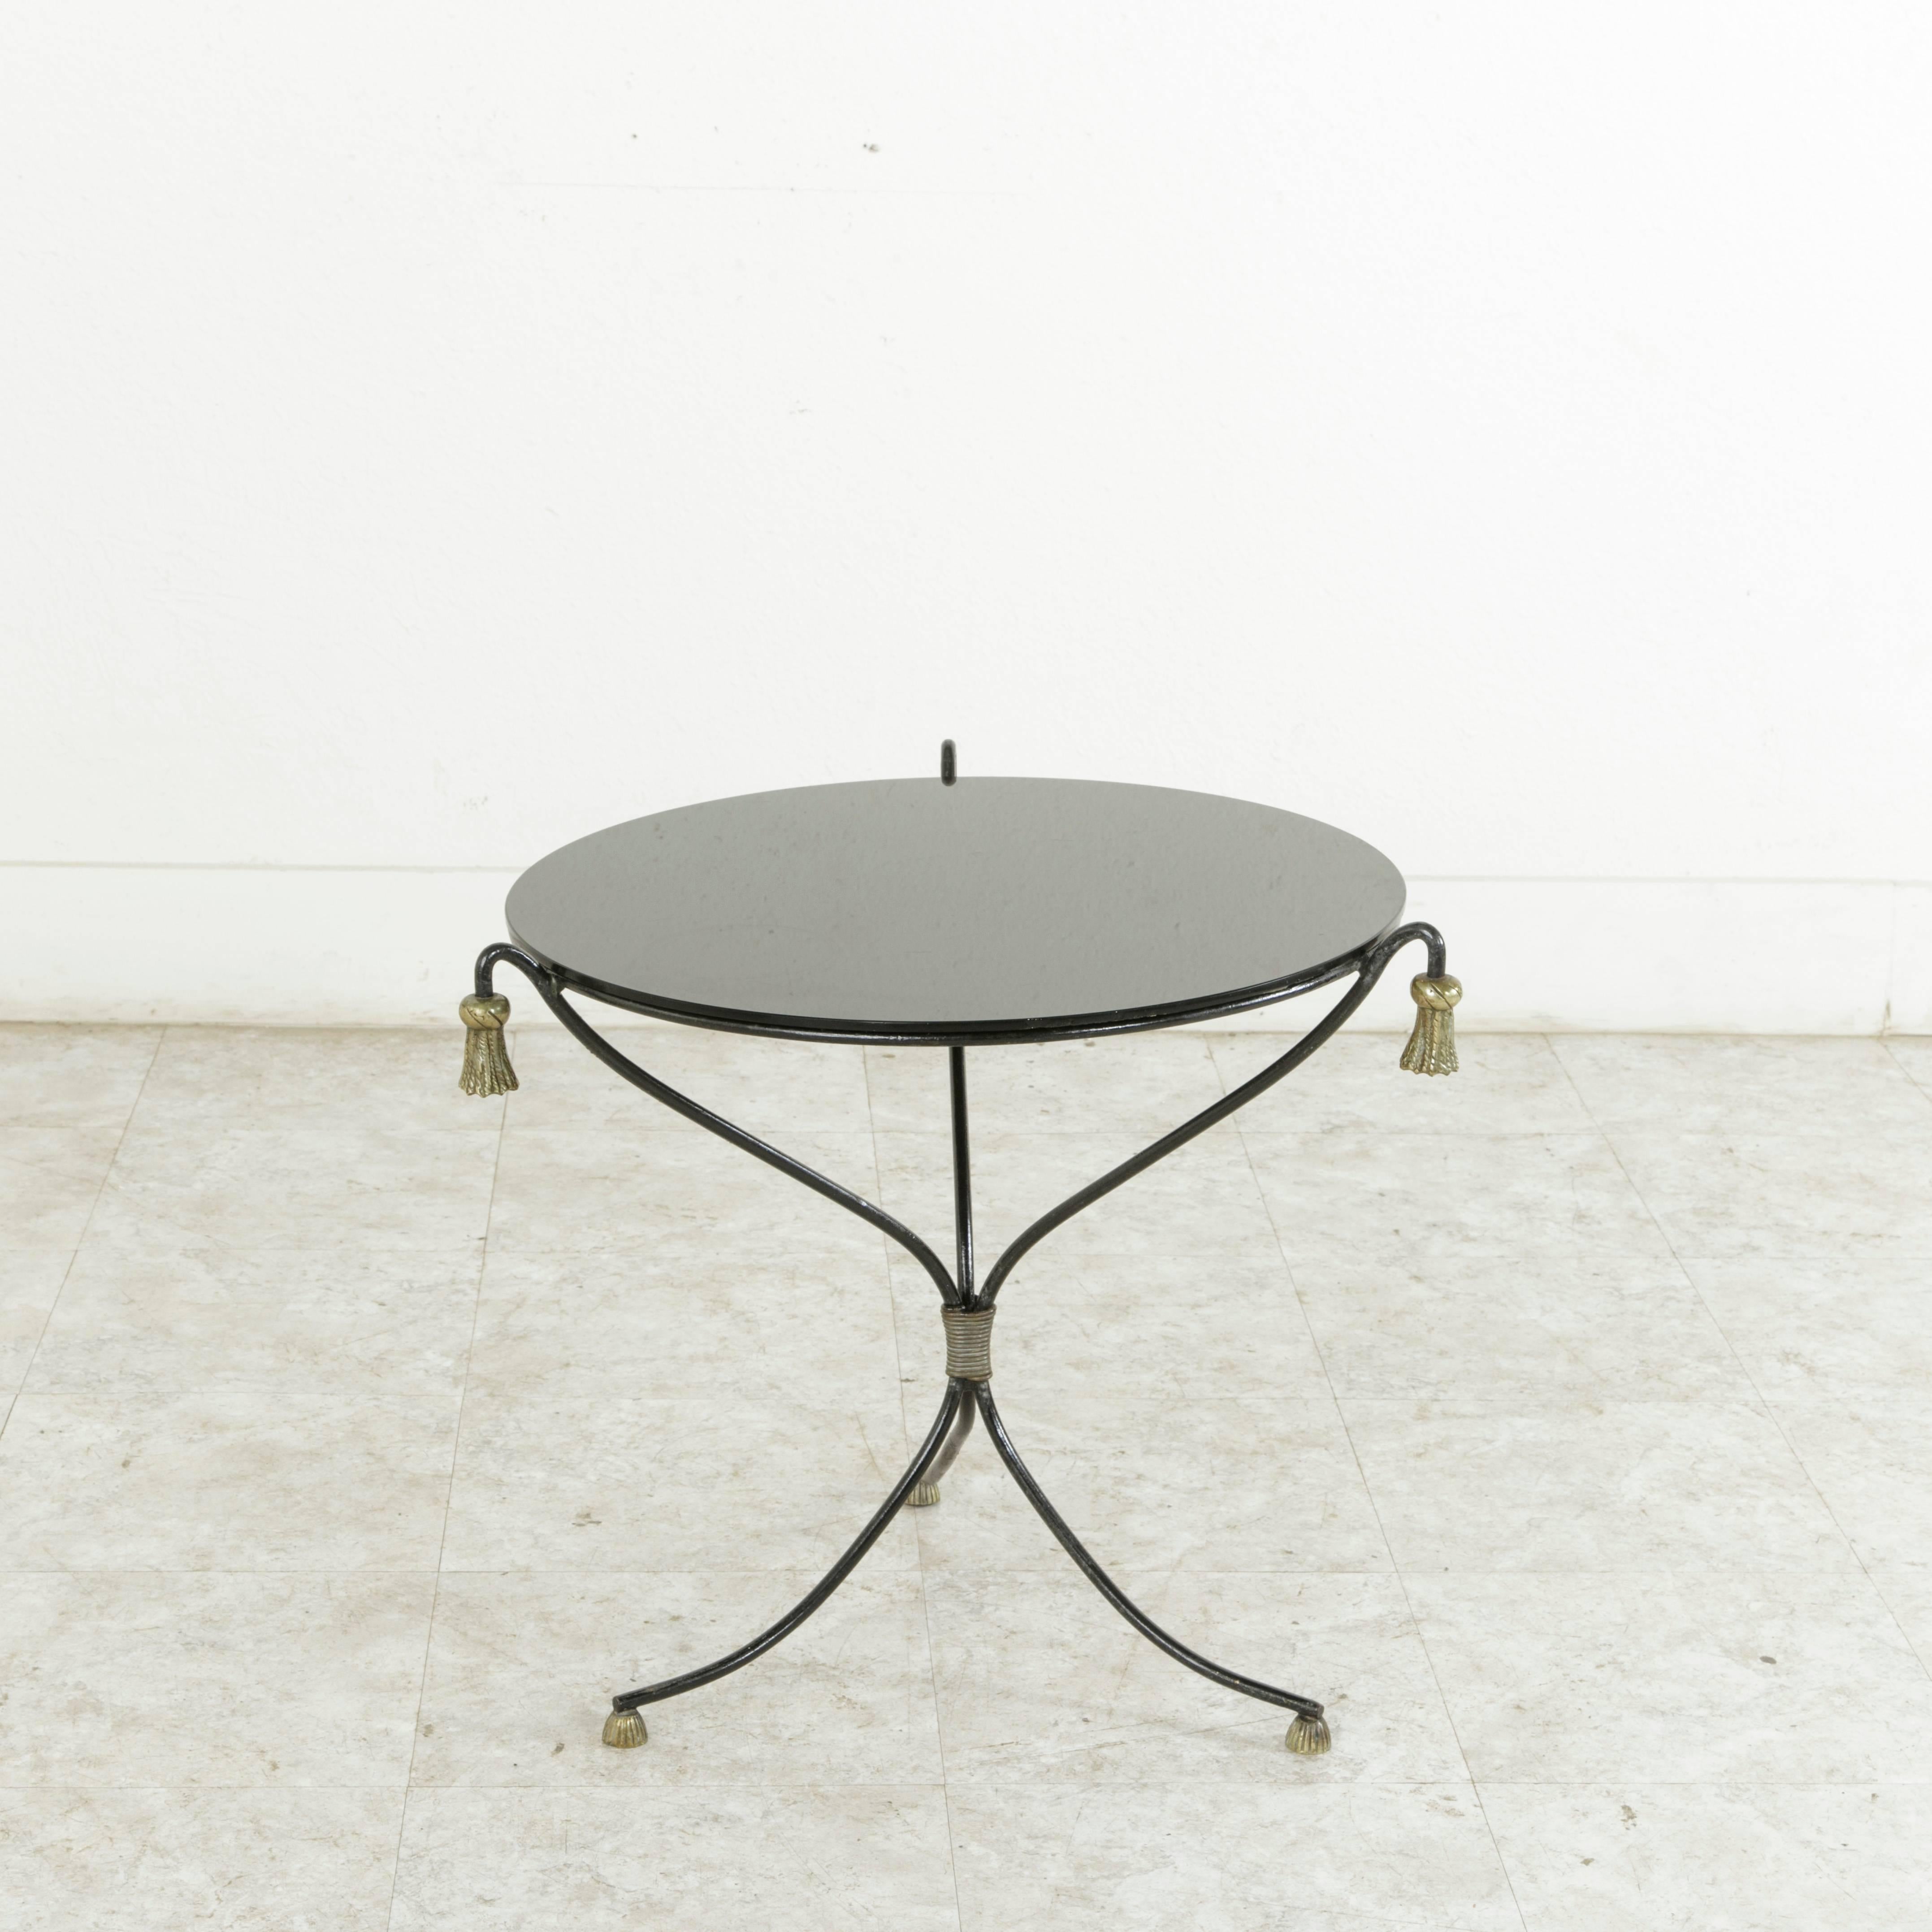 This midcentury French round iron cocktail table or side table features a pedestal base with three curved legs finished in bronze tassels both top and bottom. Its original black glass top completes the look. With a diameter of 20.5 inches, this